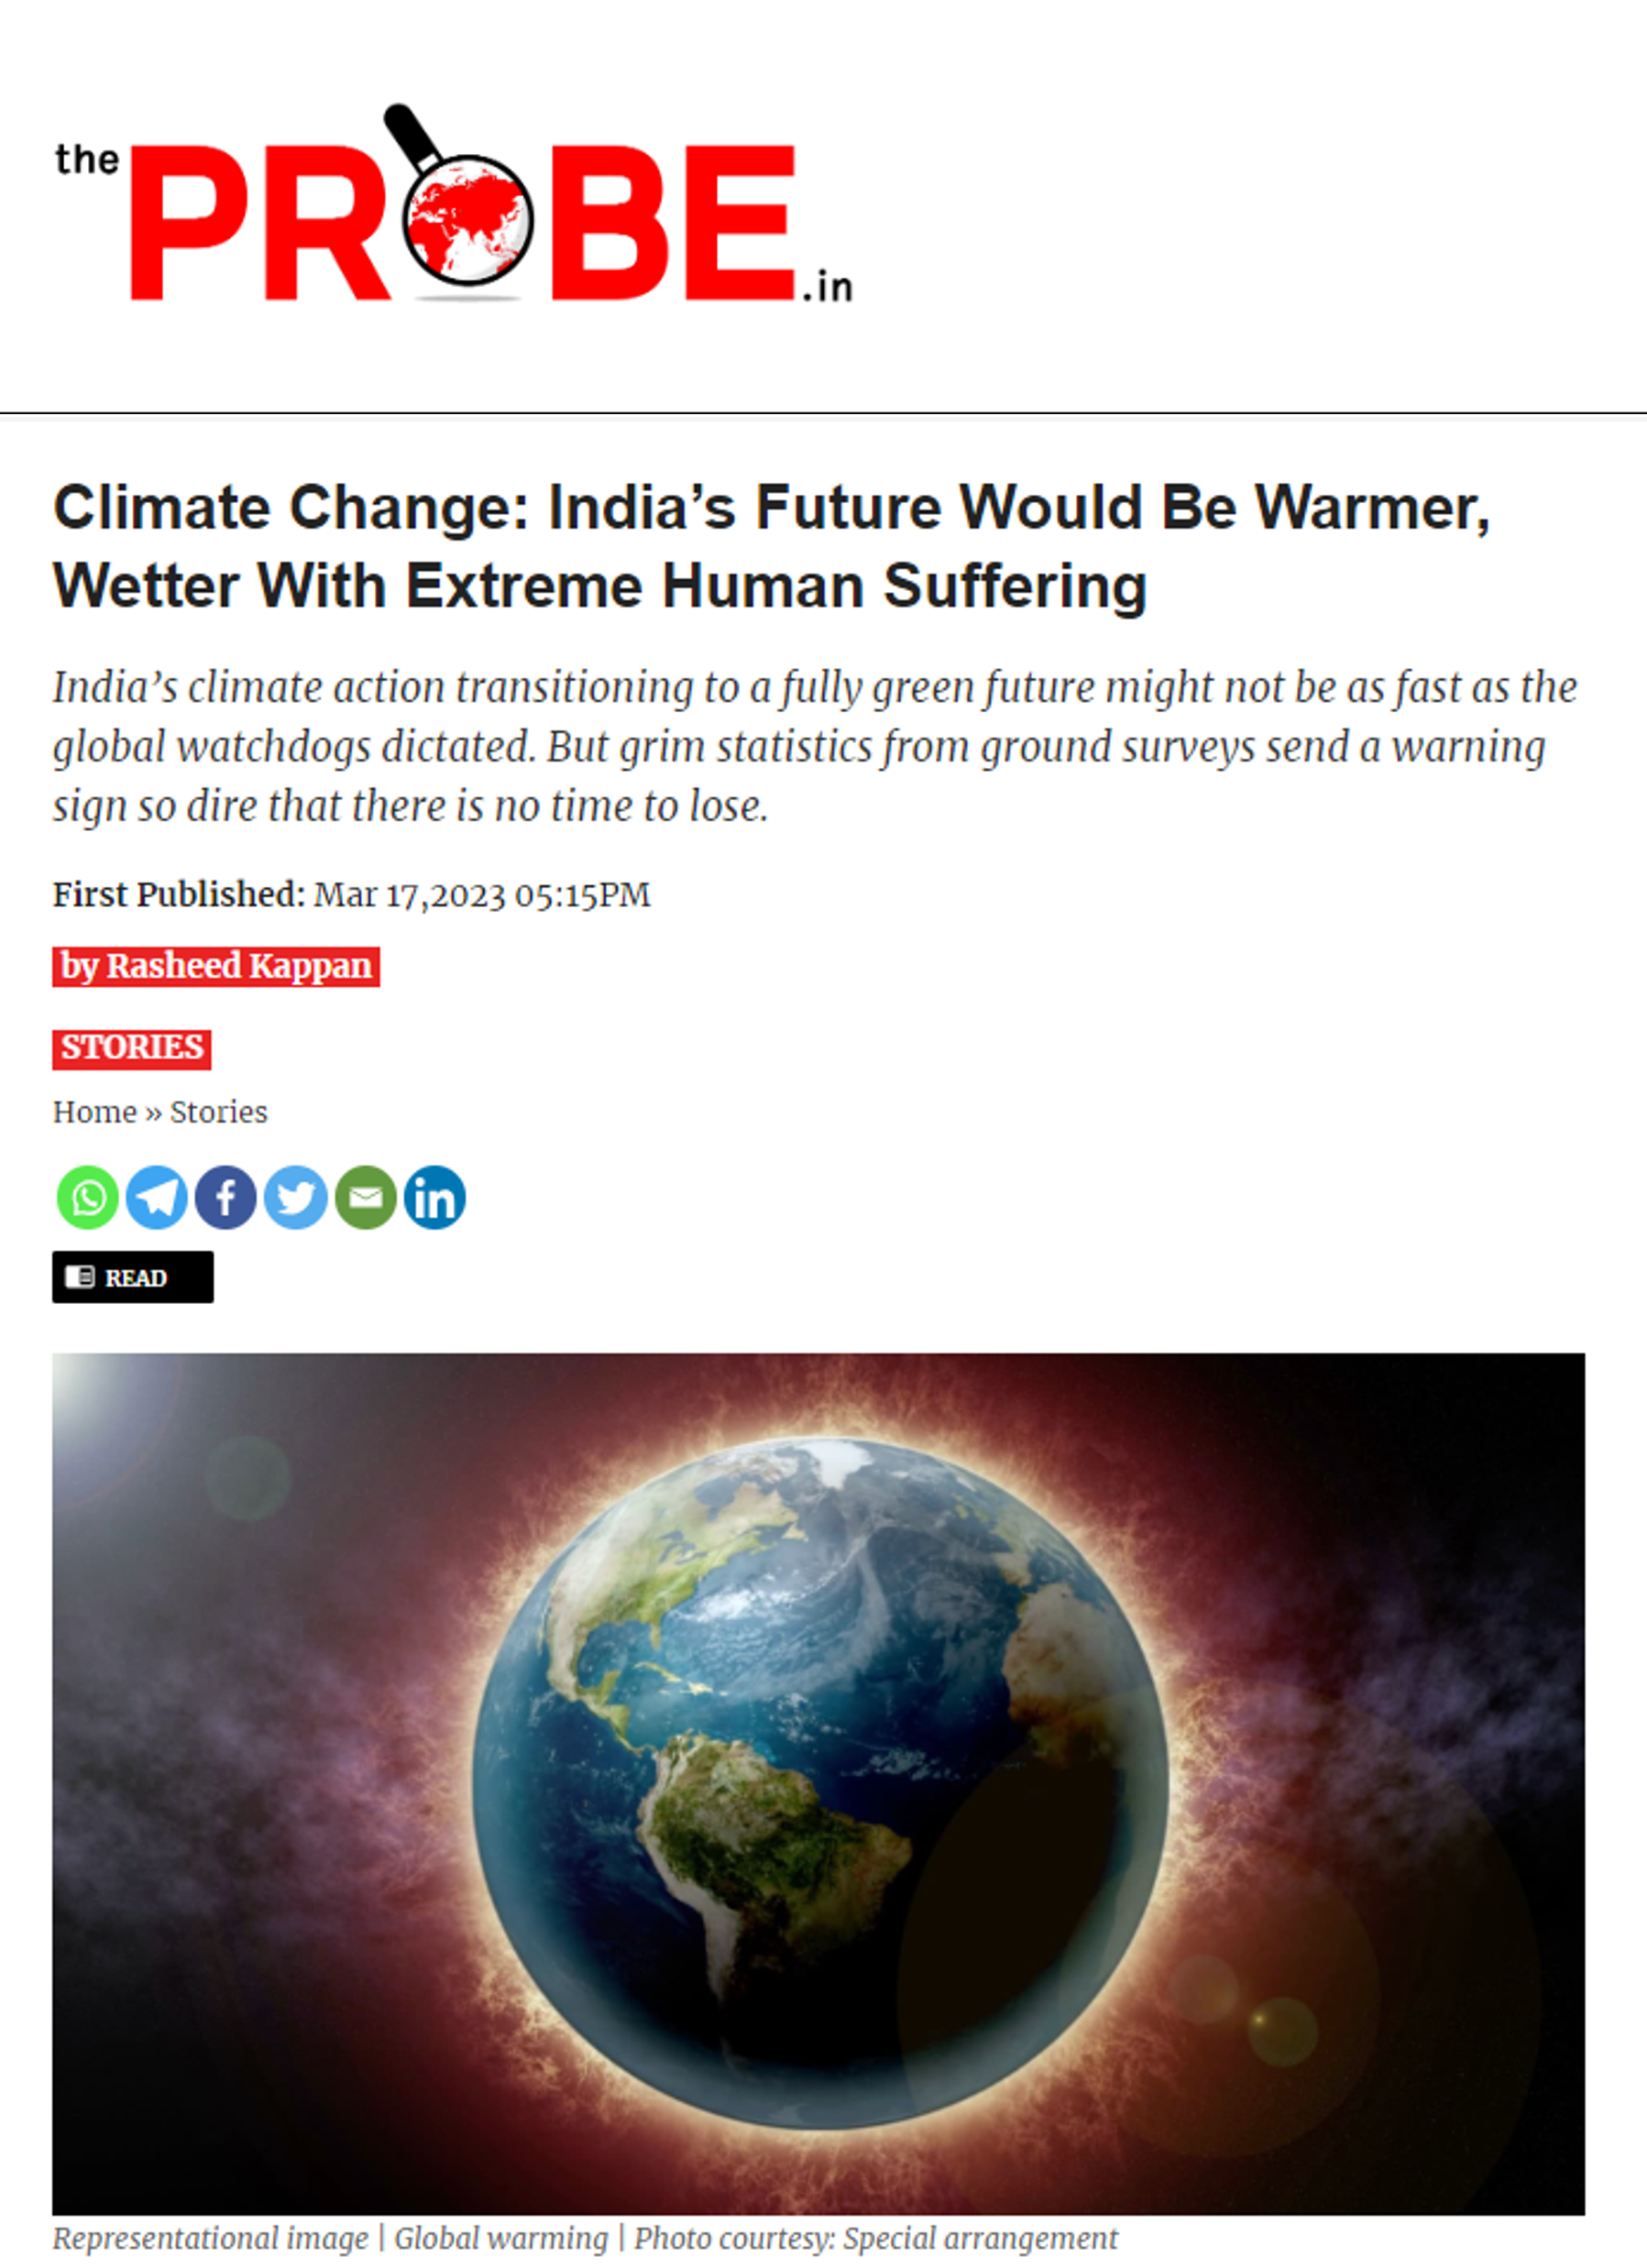 CSTEP study mentioned in and Dr Indu K Murthy quoted by The Probe on climate change impacts